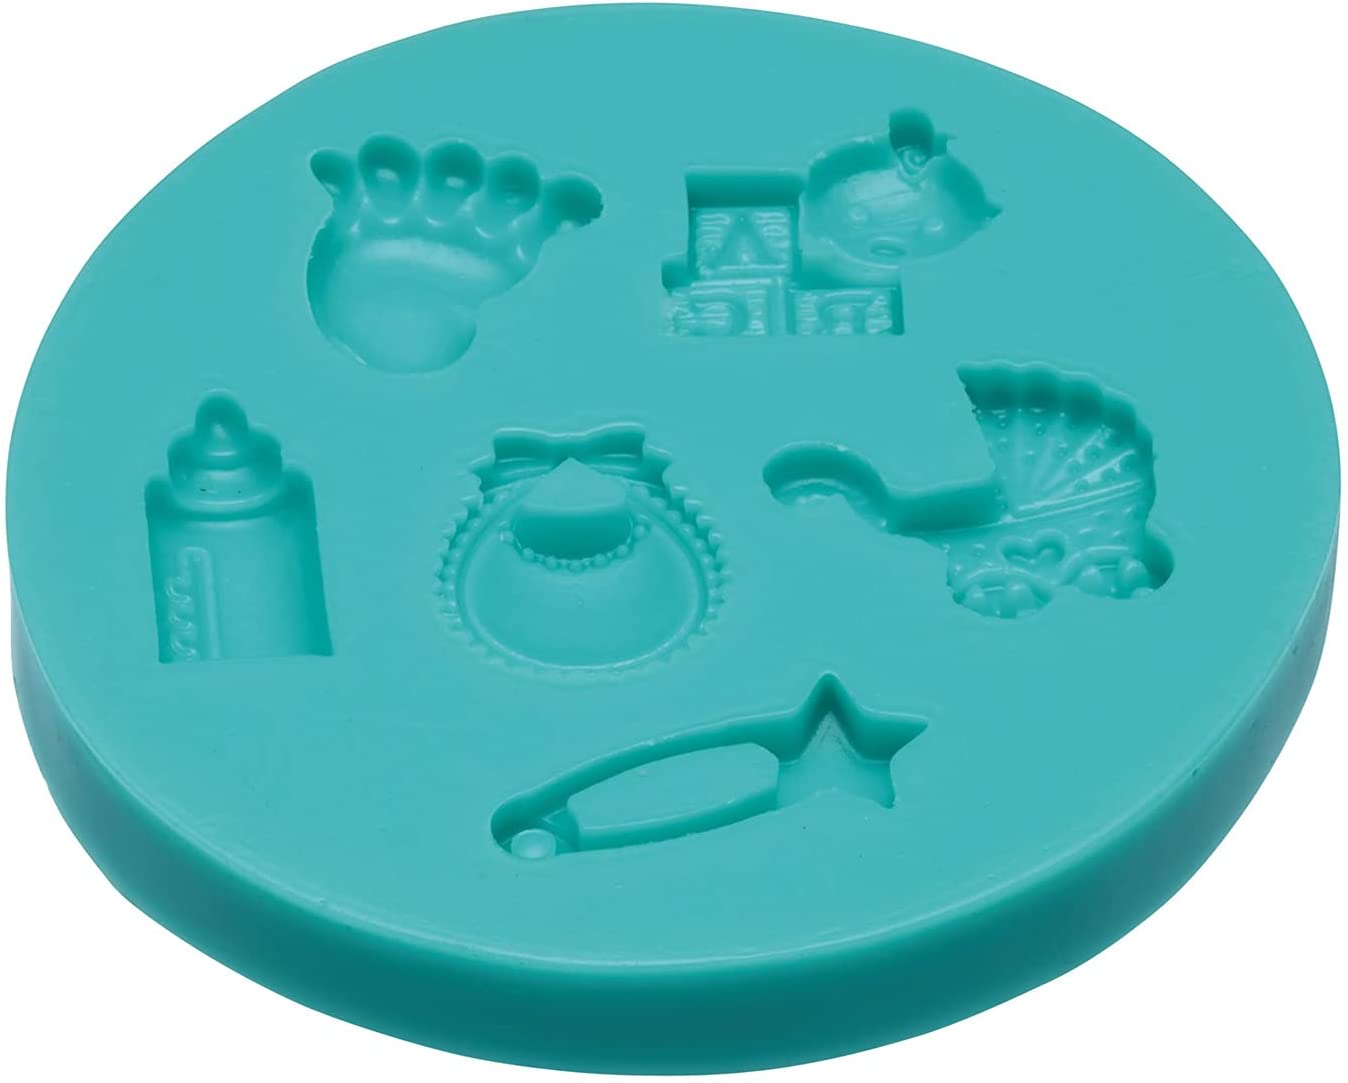 KitchenCraft Sweetly Does It Baby Silicone Fondant Mould